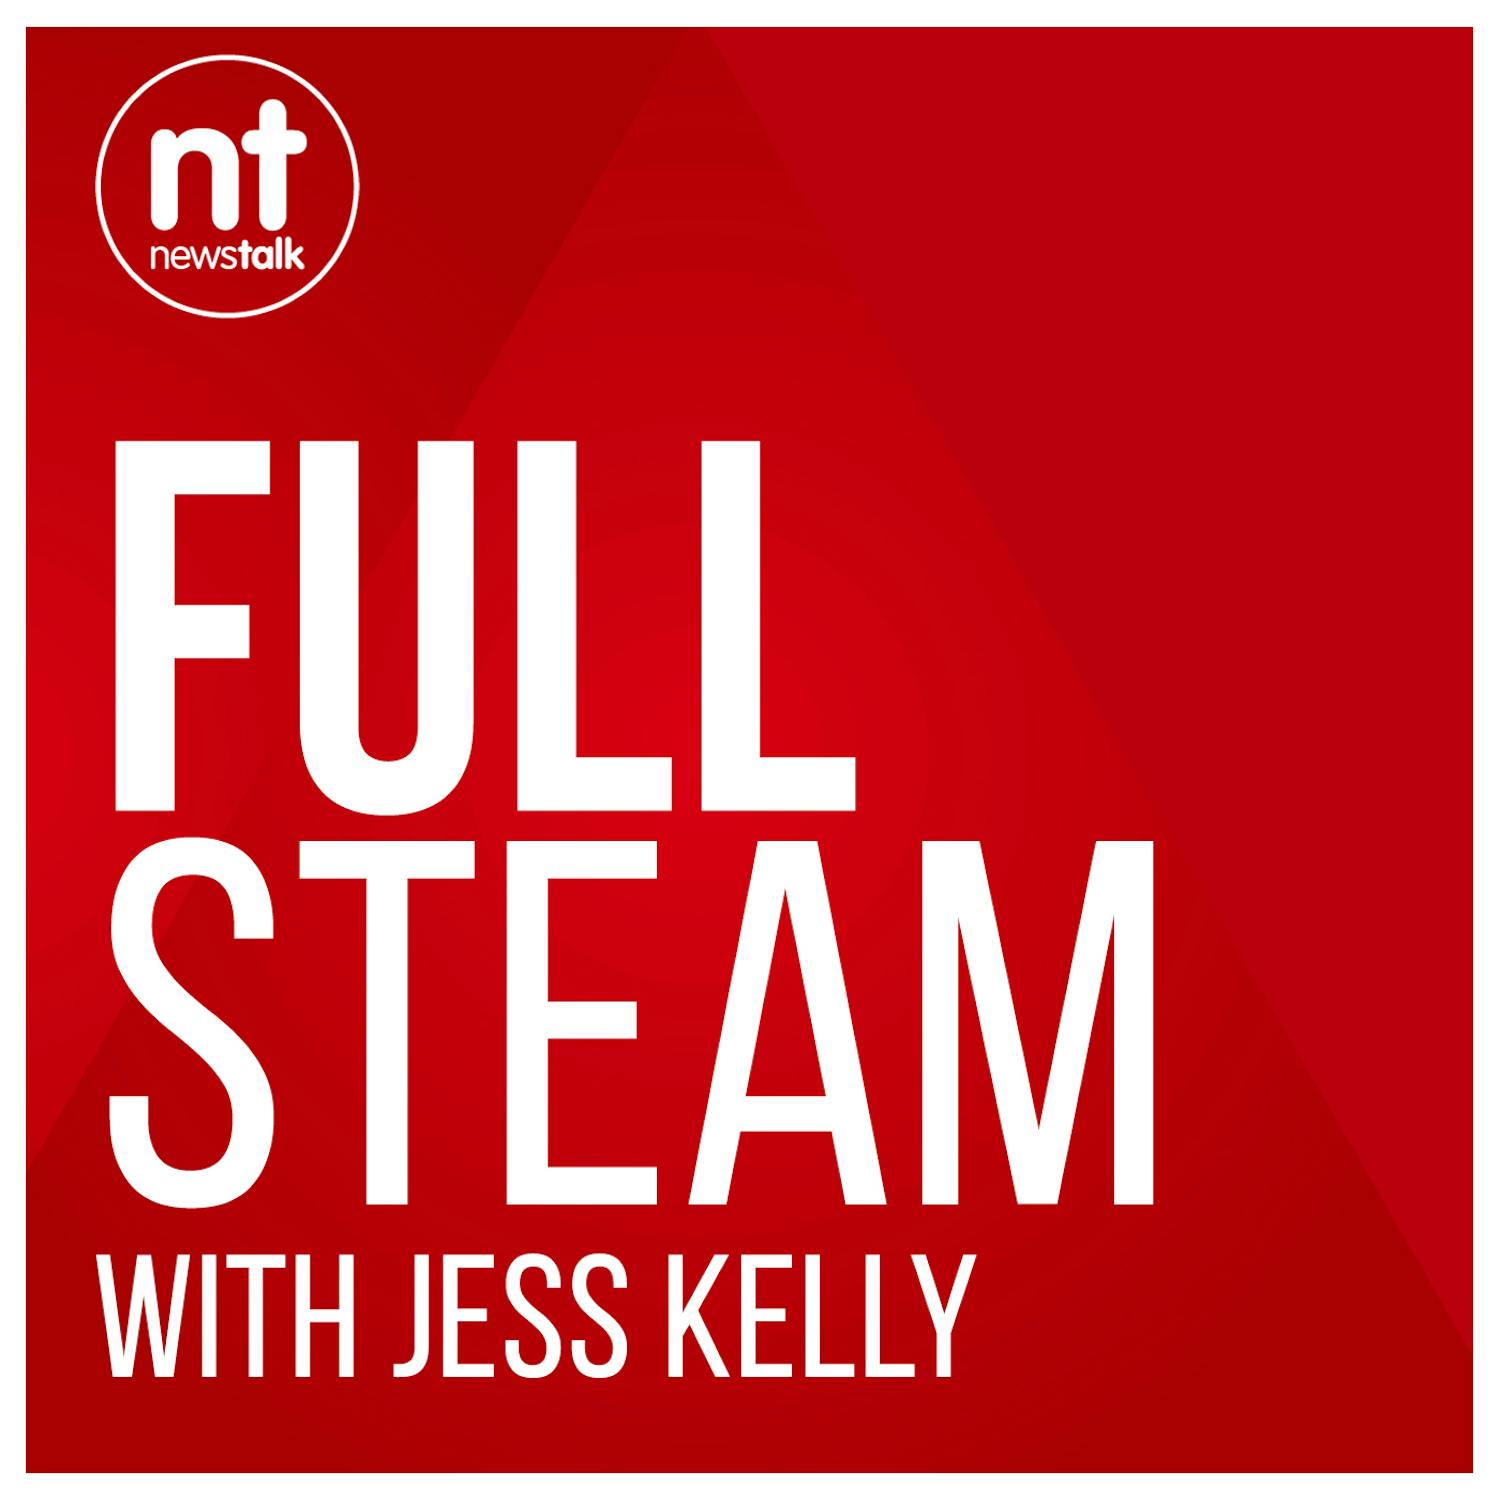 Full STEAM with Jess Kelly: Anne O'Leary, Vodafone Ireland